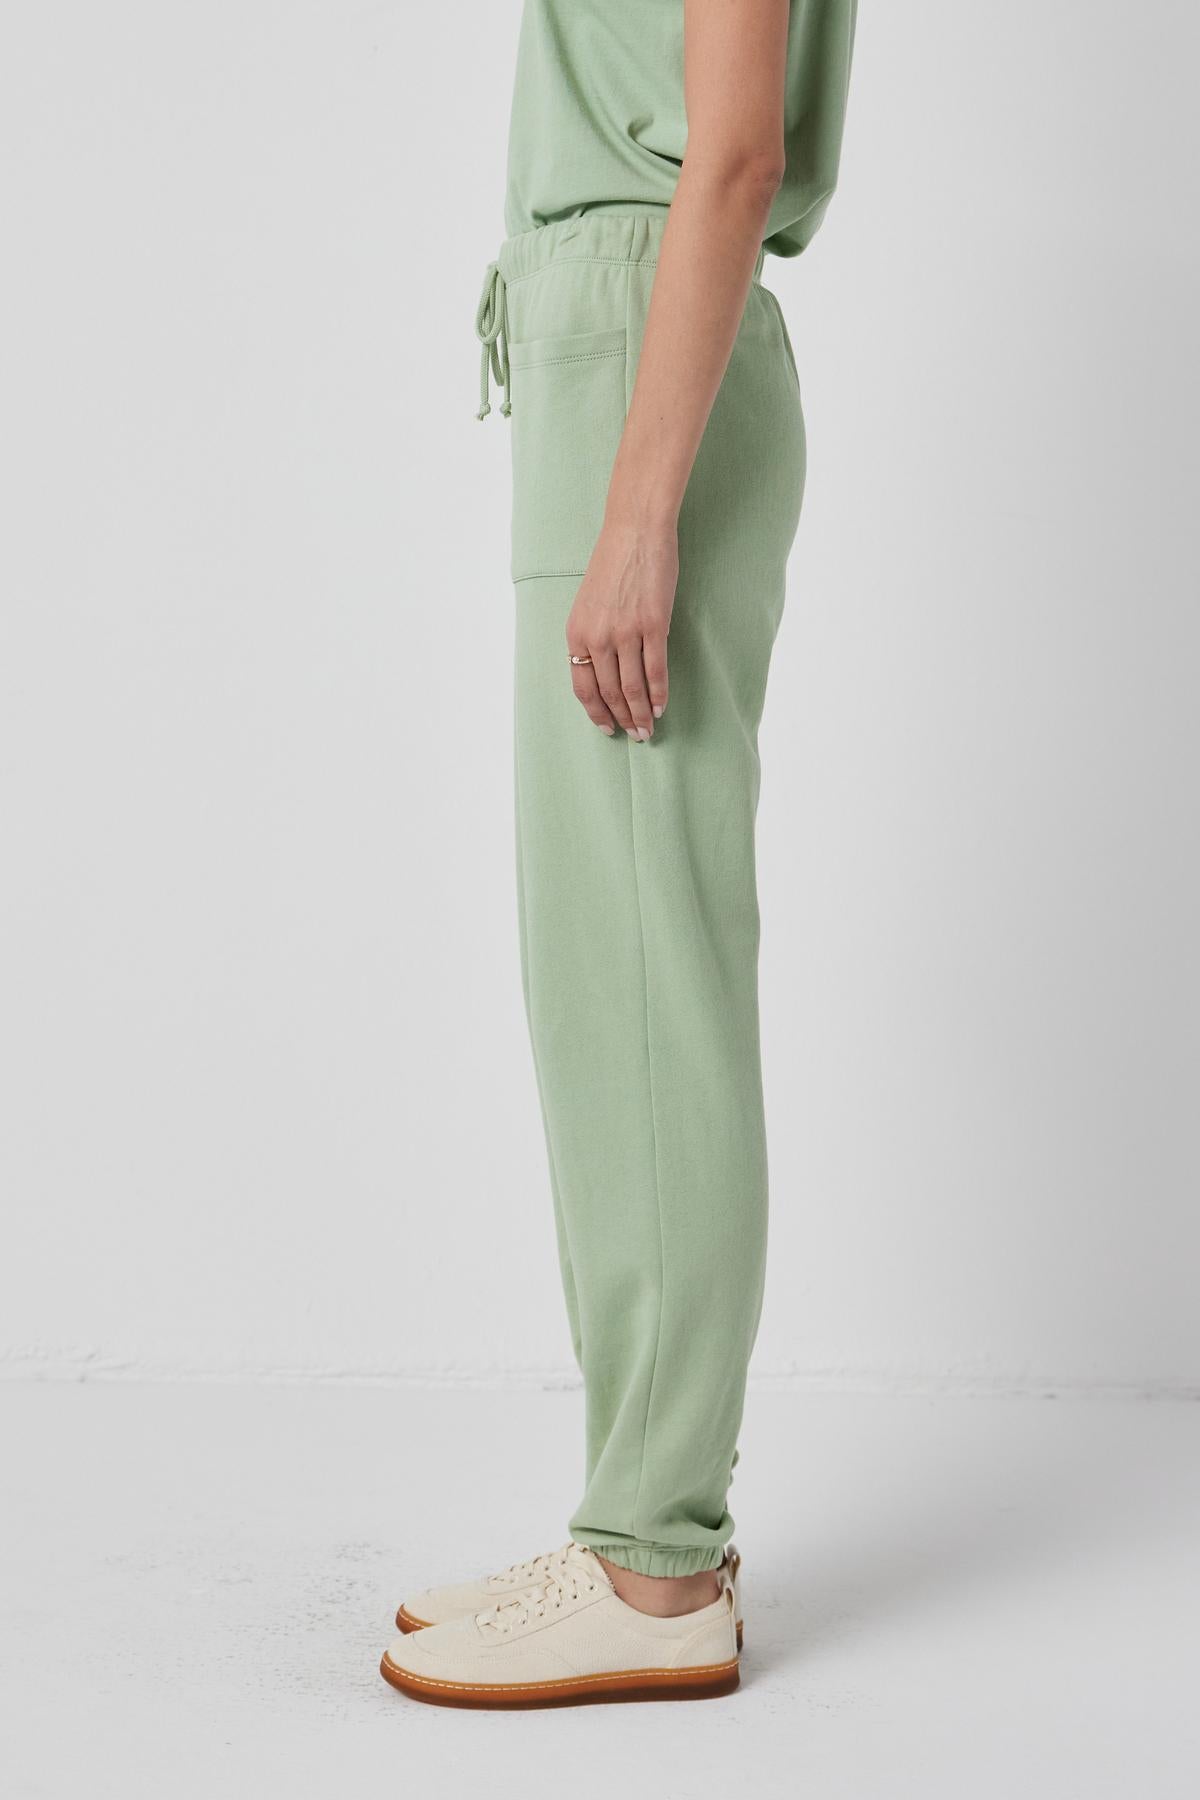   The model is wearing a green Westlake Sweatpant and a white tee by Velvet by Jenny Graham. 